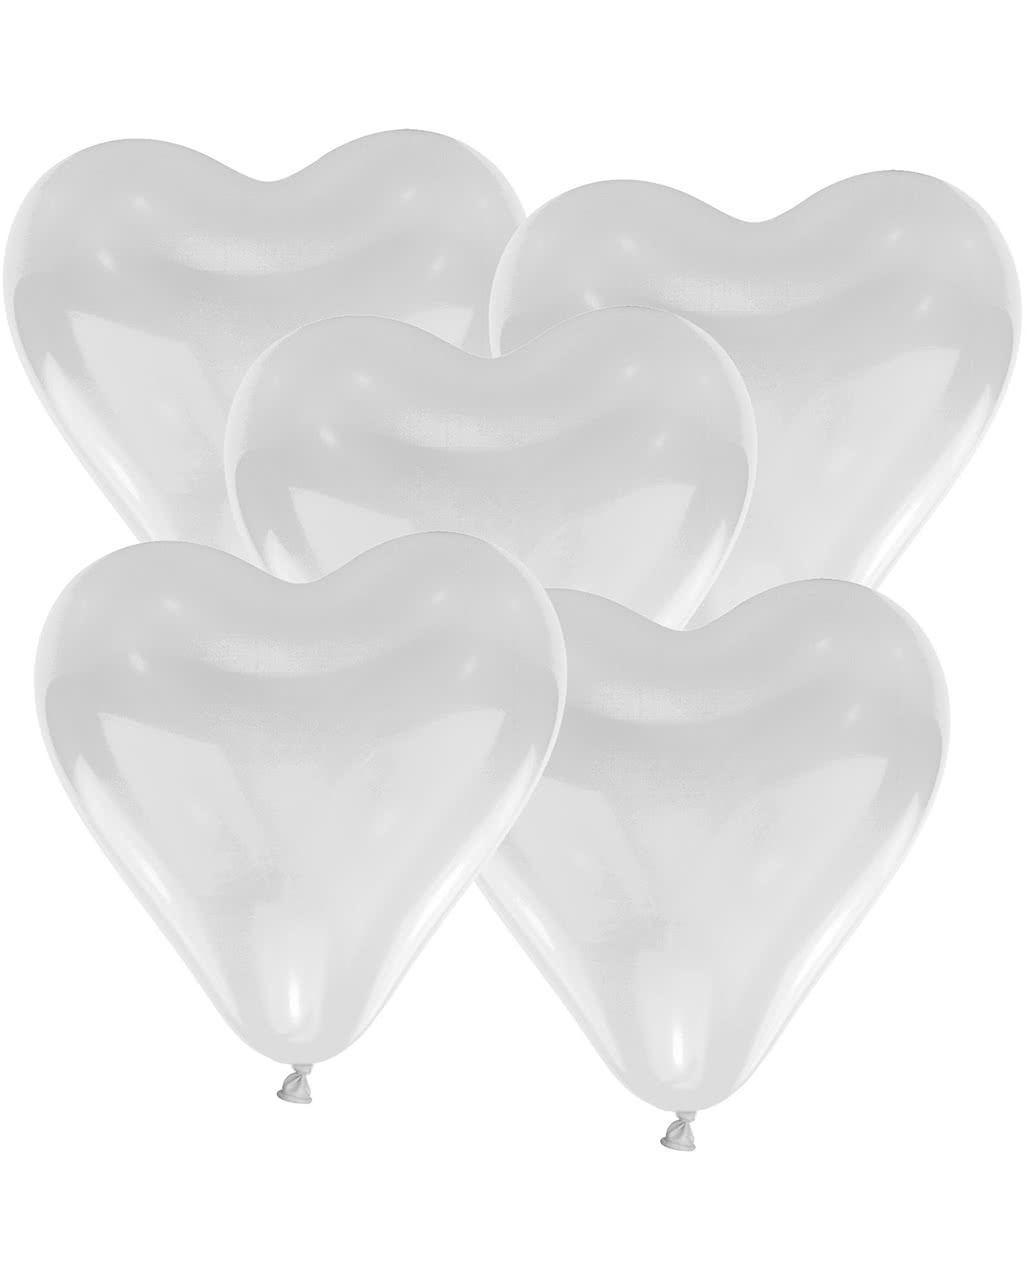 10-100 Heart Shape White & Mix Colour Balloons Helium For Mothers Day Wedding UK 